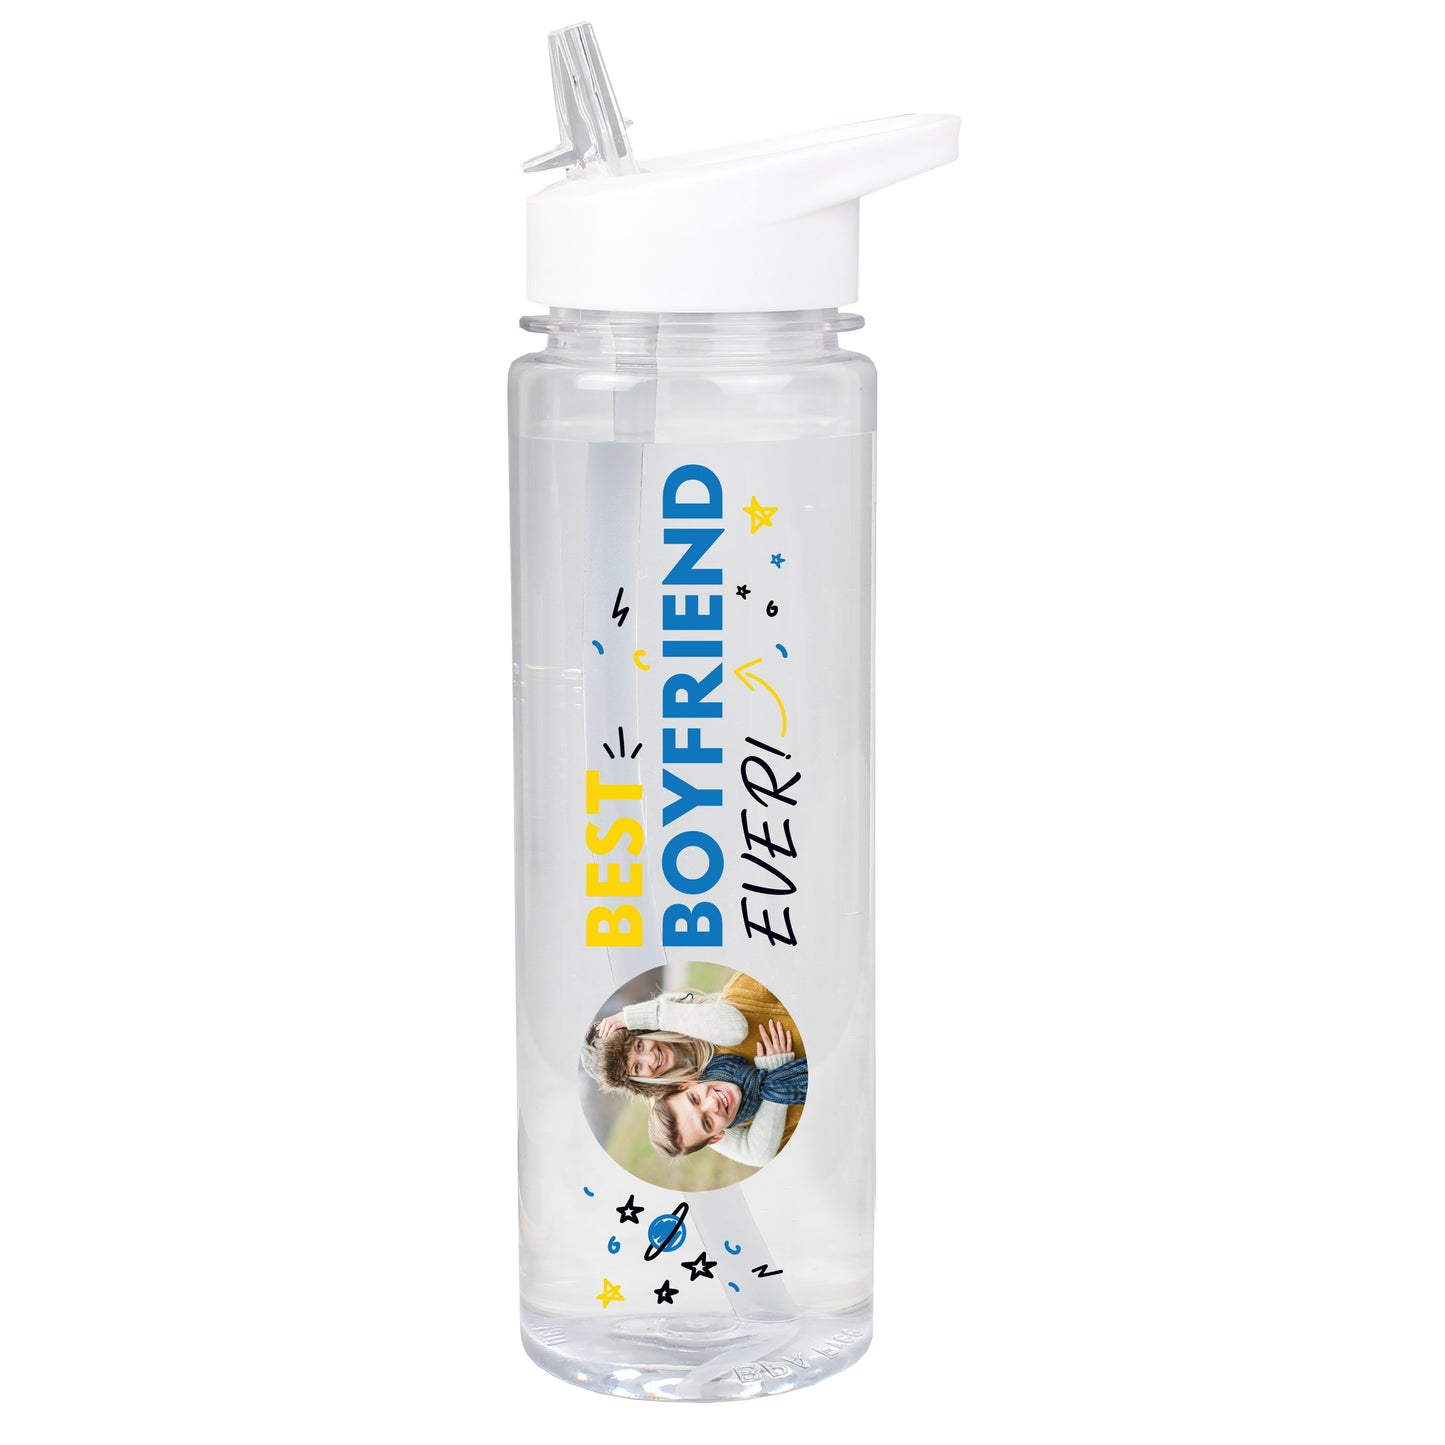 Personalised Water Bottle Best Ever With Photo Upload